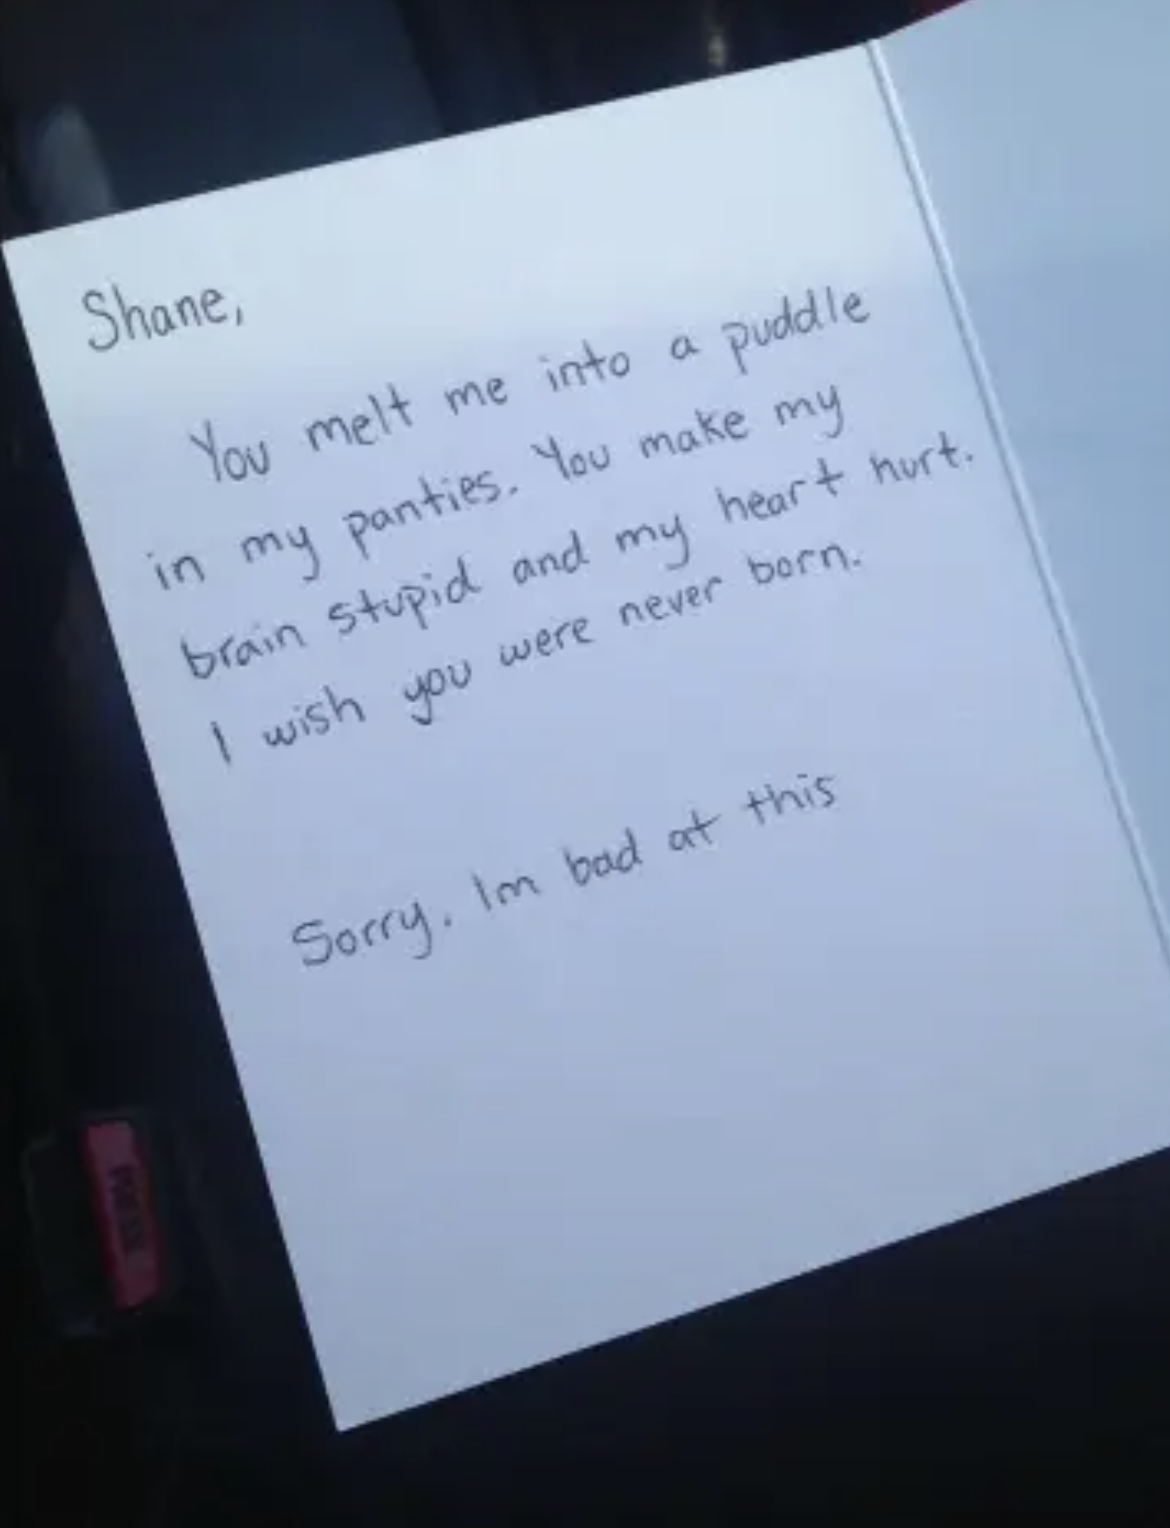 A handwritten note expressing conflicting emotions of attraction and frustration